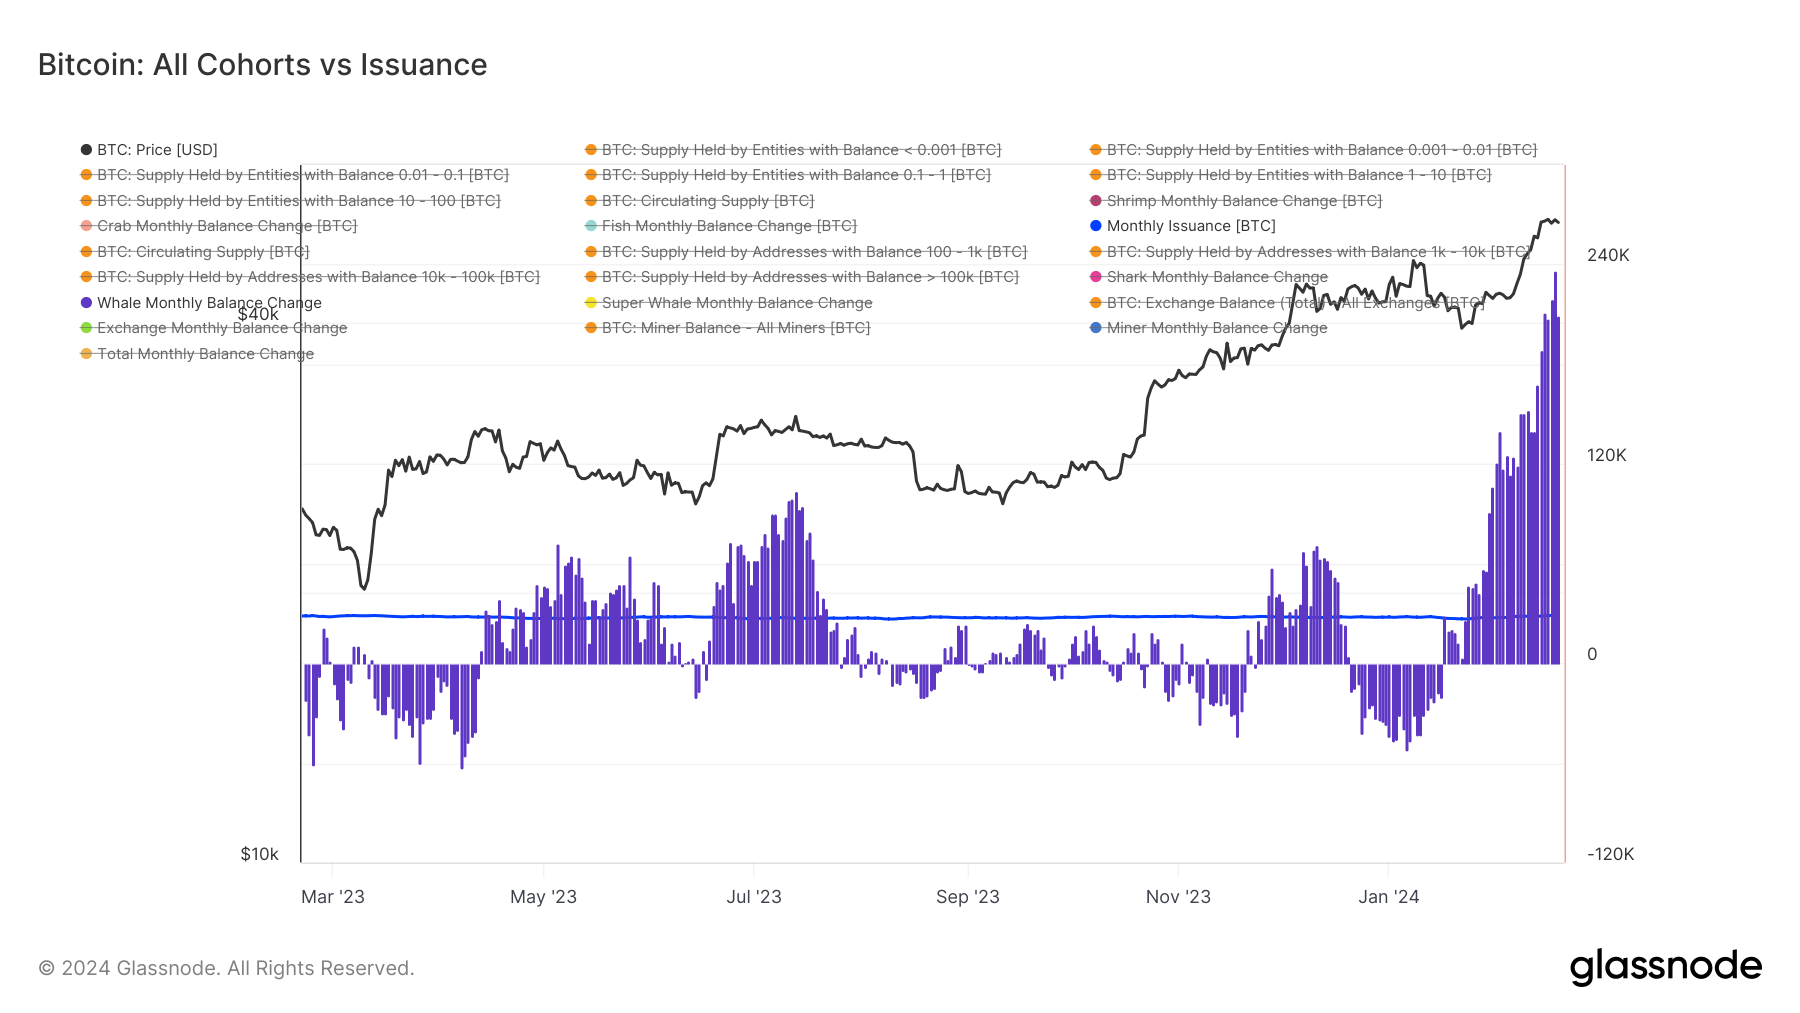 Bitcoin Whales vs Issuance: (Source: Glassnode)